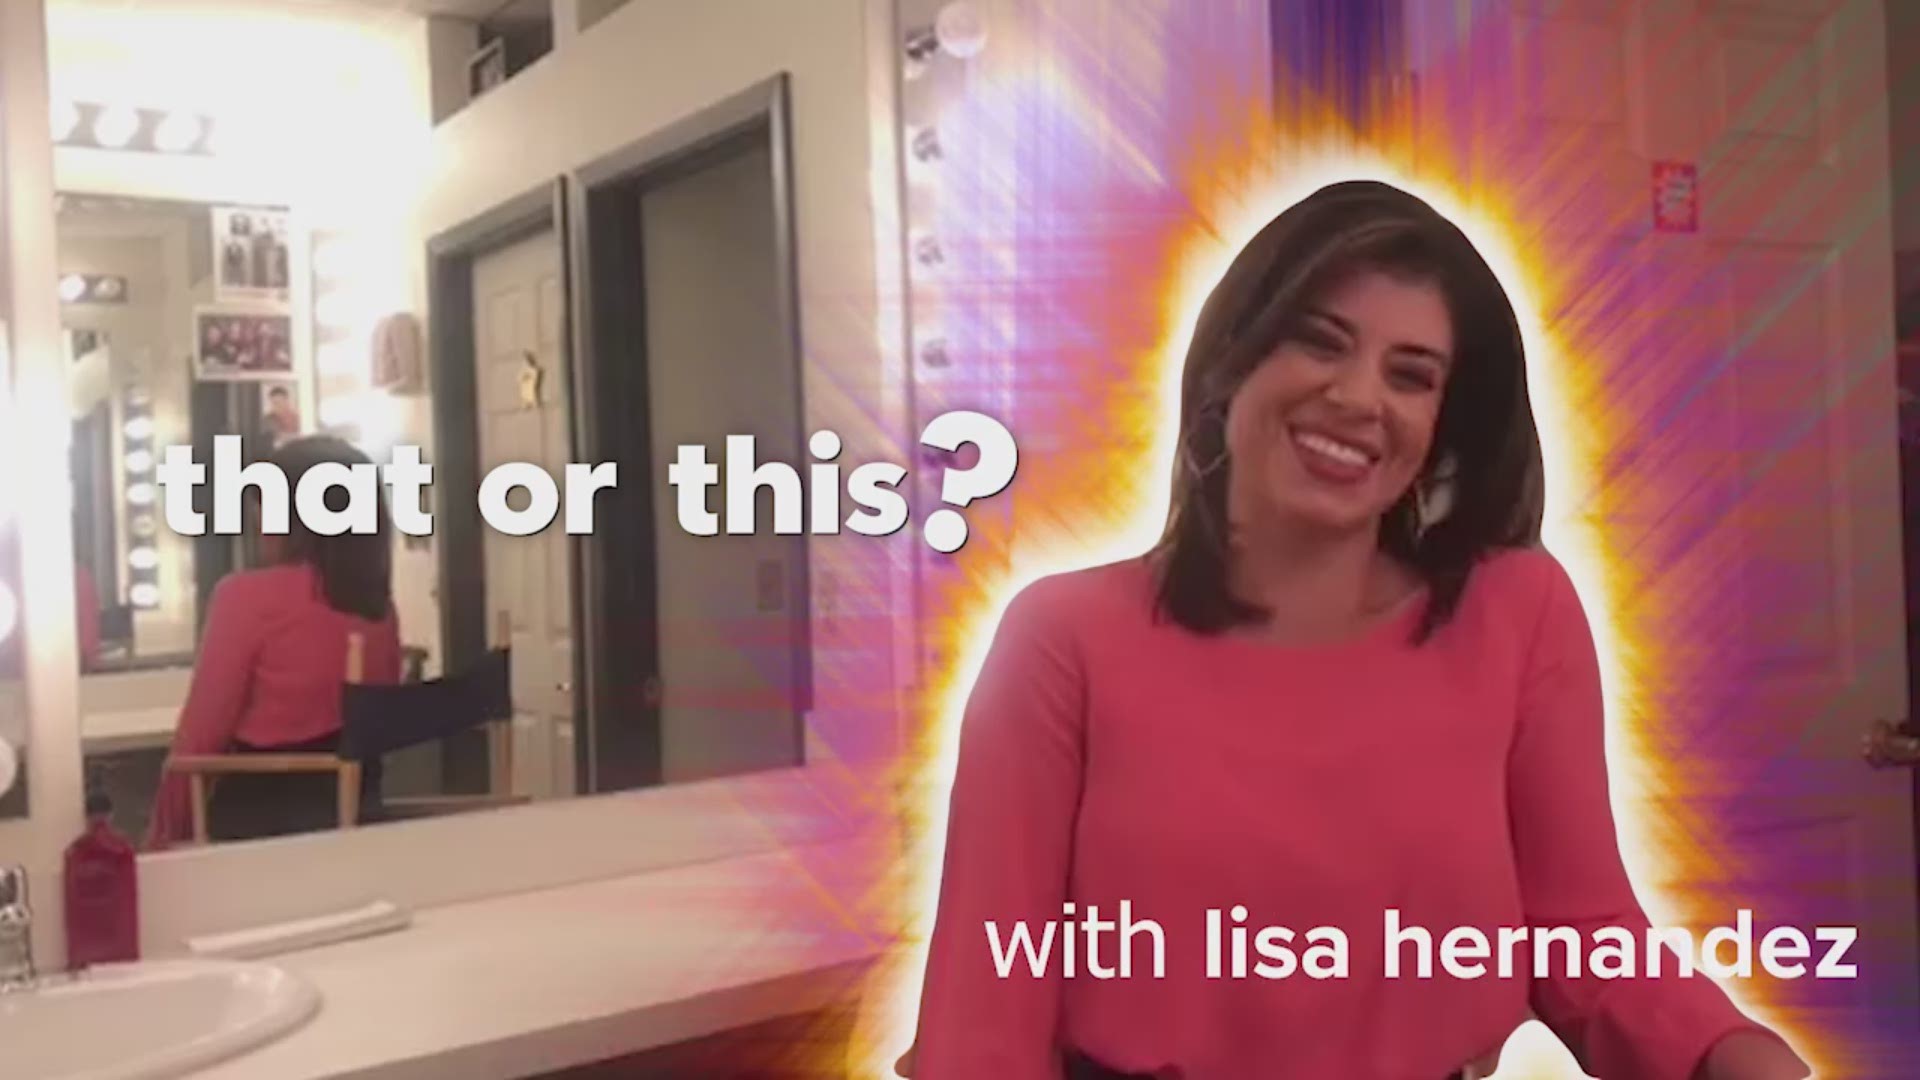 Bet you'll never guess what morning anchor Lisa Hernandez chose for a favorite music style! ?? We played This Or That with Lisa and now we're practicing our handshake skills. Check out her choices then Check out our YouTube channel for more behind the scenes videos!(Hope R. Carter)